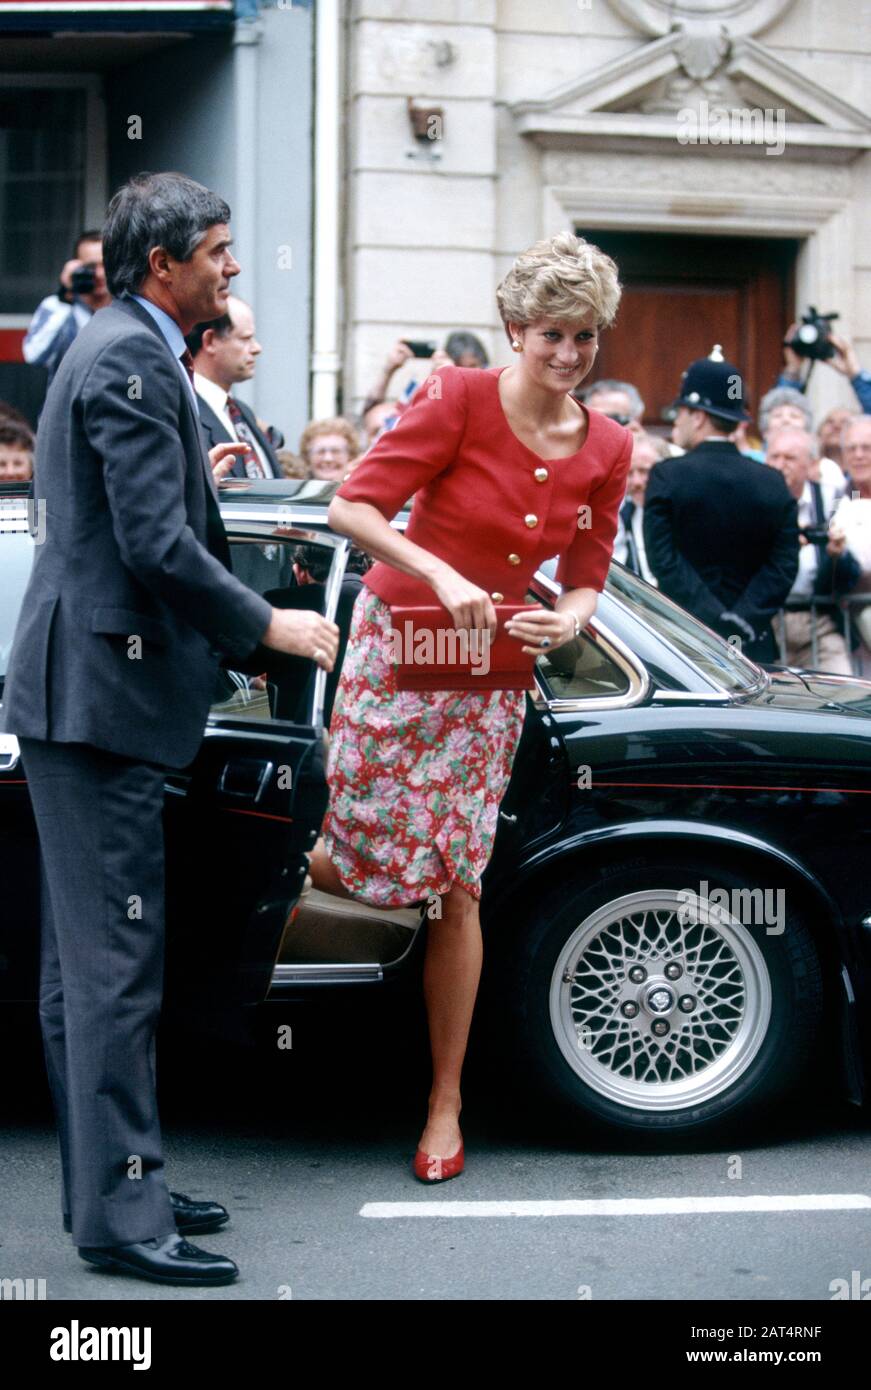 Colin Trimming-Royal protection officer opens the car door for Princess Diana, Devon, England May 1992 Stock Photo